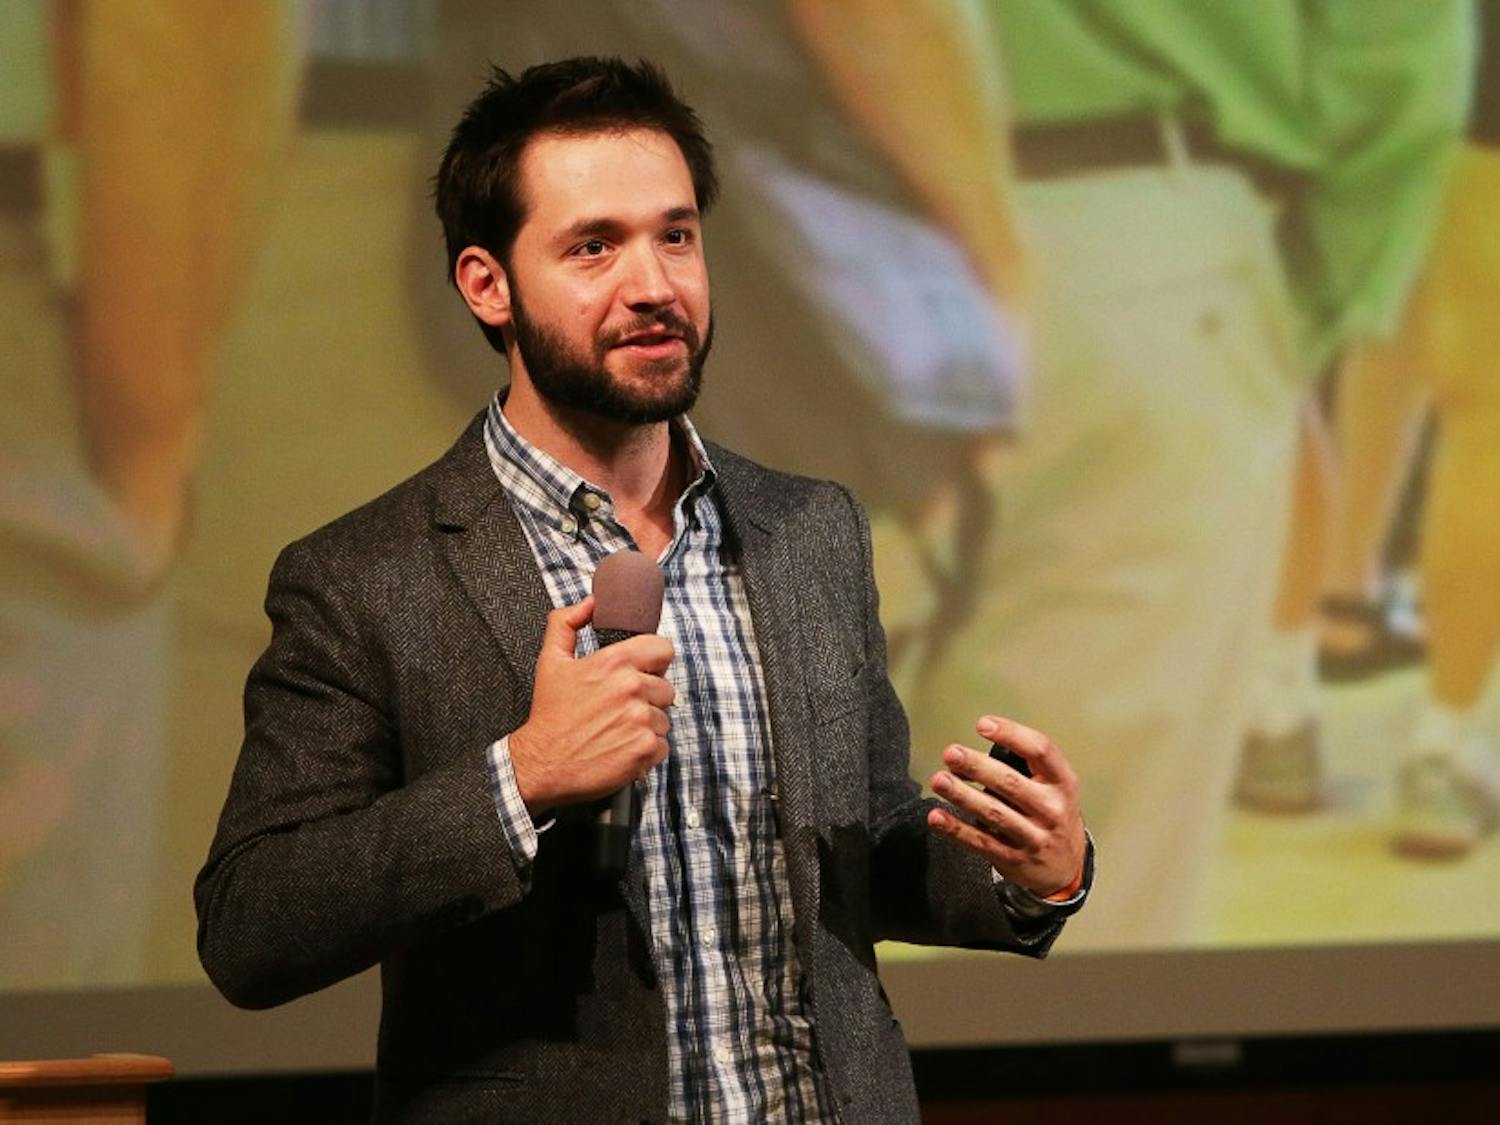 Alexis Ohanian, a co-founder of reddit, promoted his book at a talk held by the Fuqua School of Business Tuesday evening,